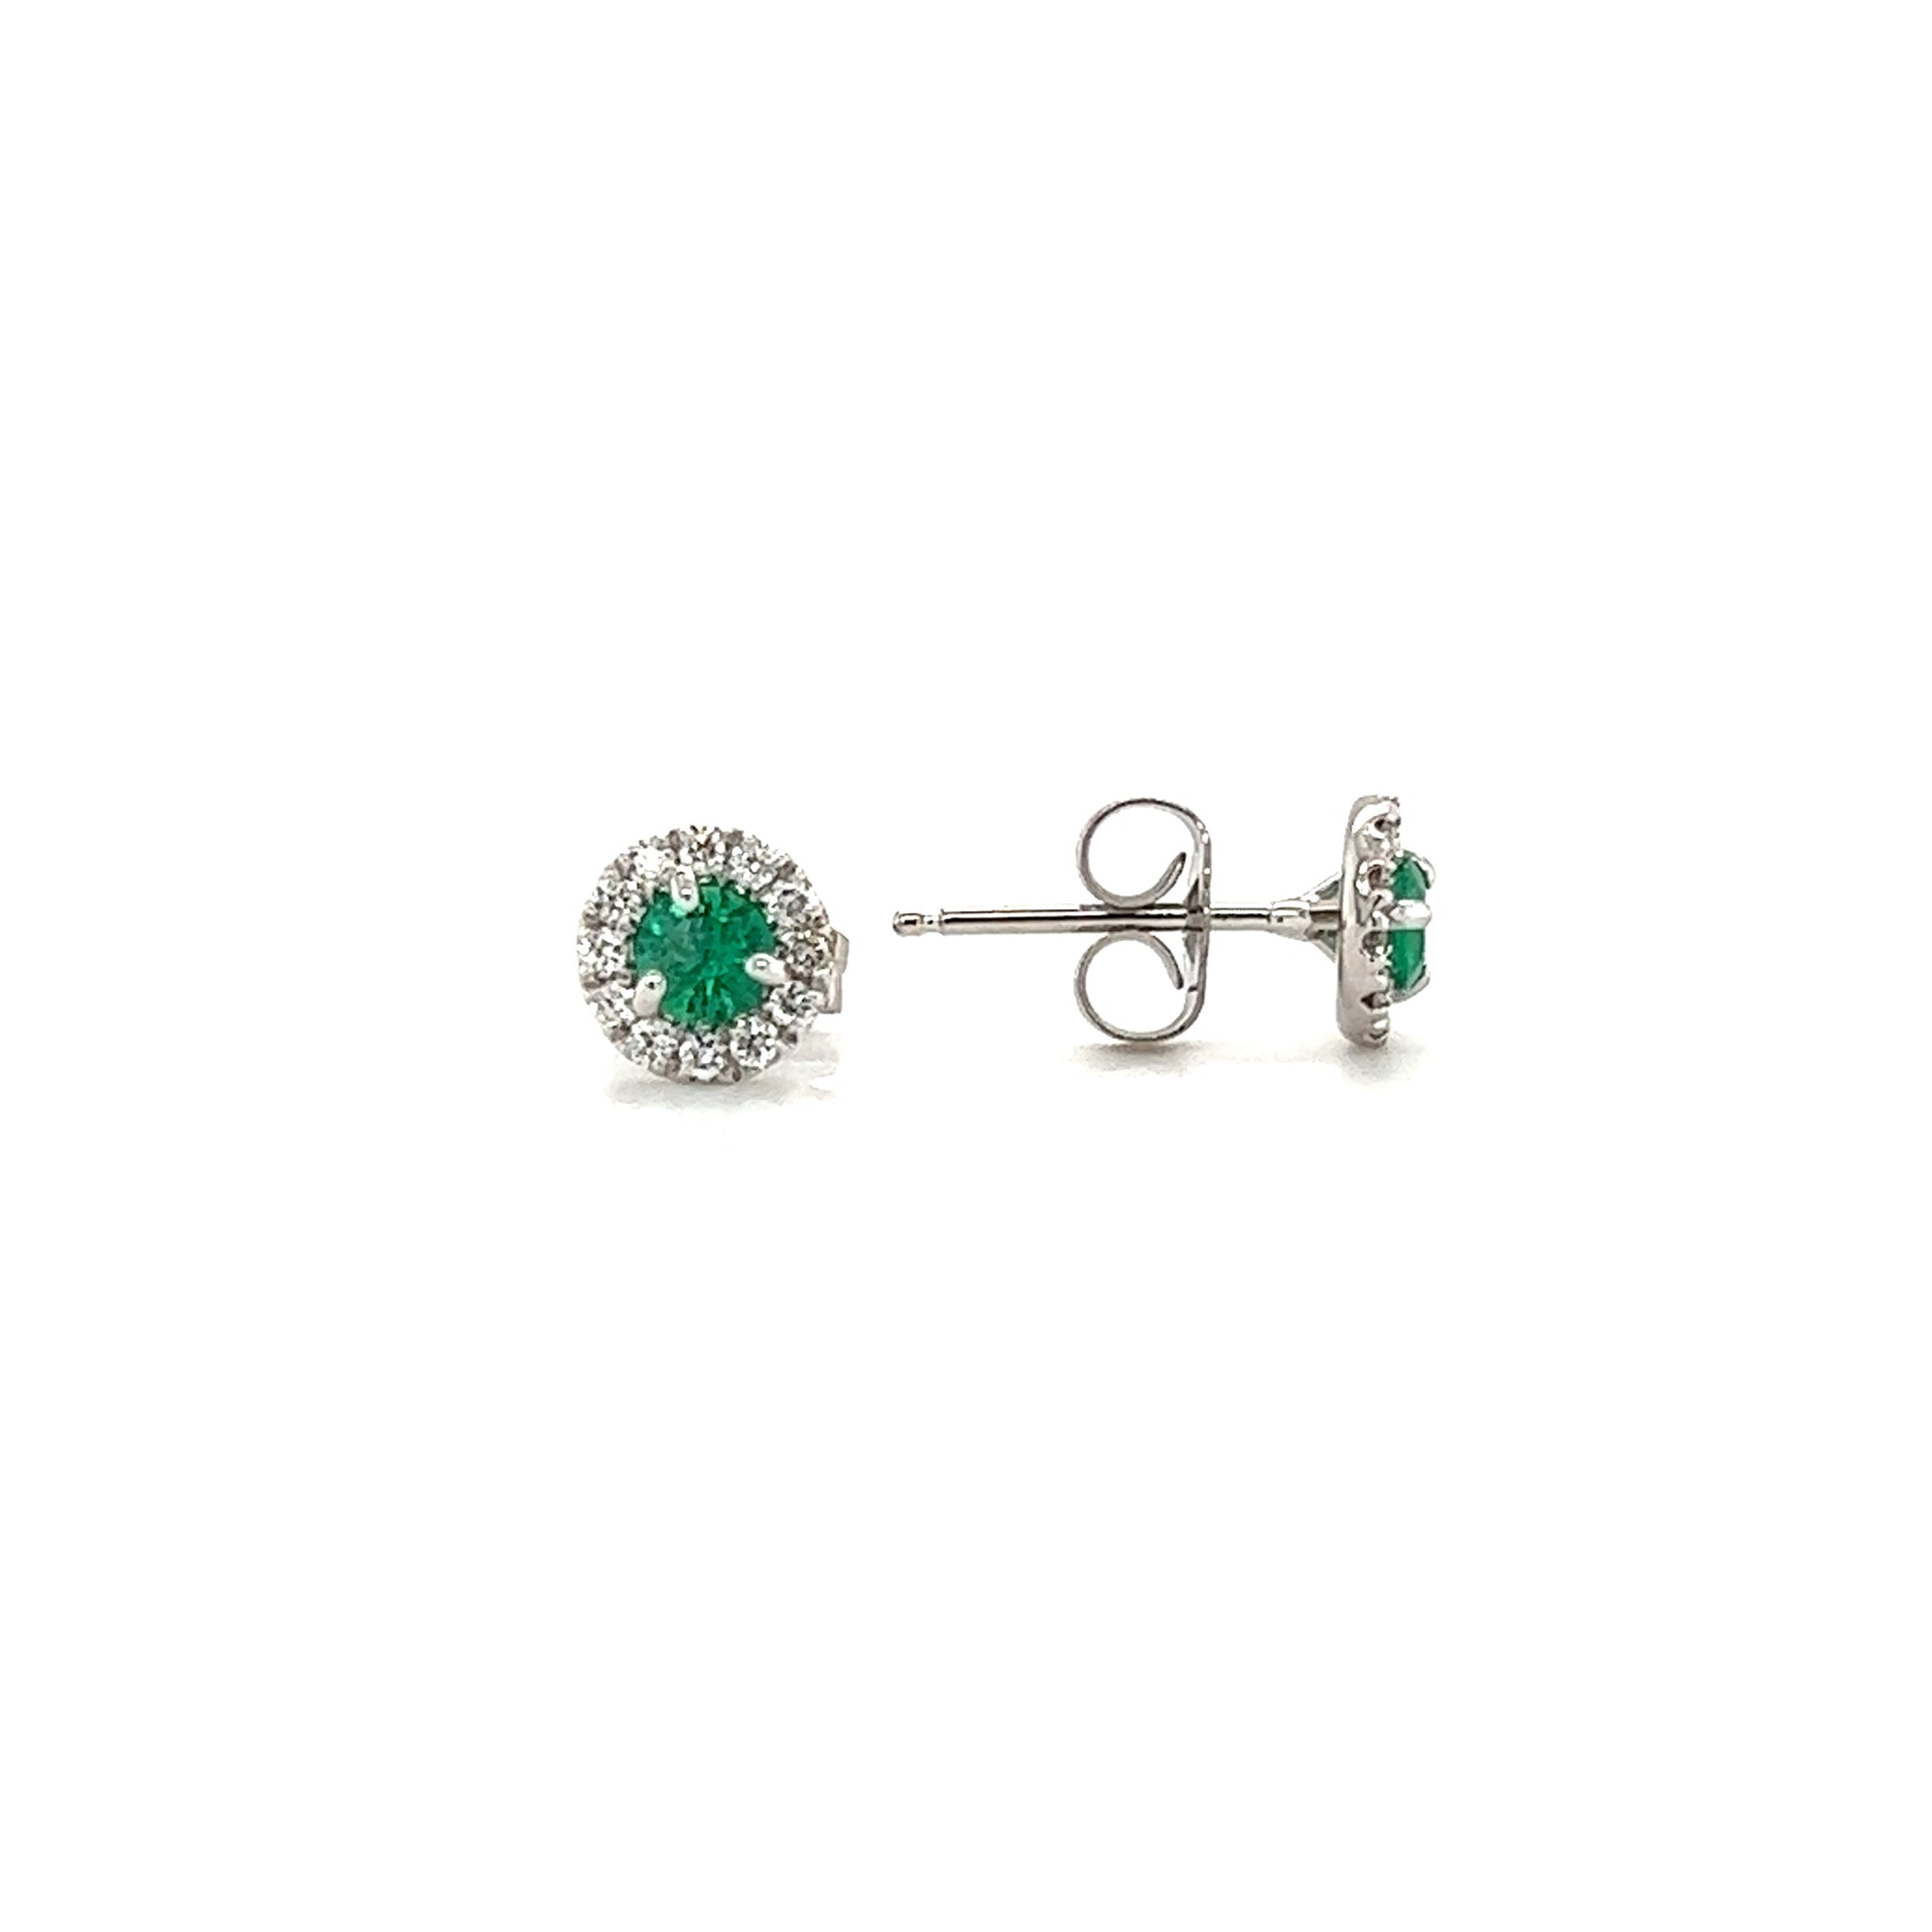 Round Emerald Stud Earrings with Diamond Halo in 14K White Gold Front and Side View